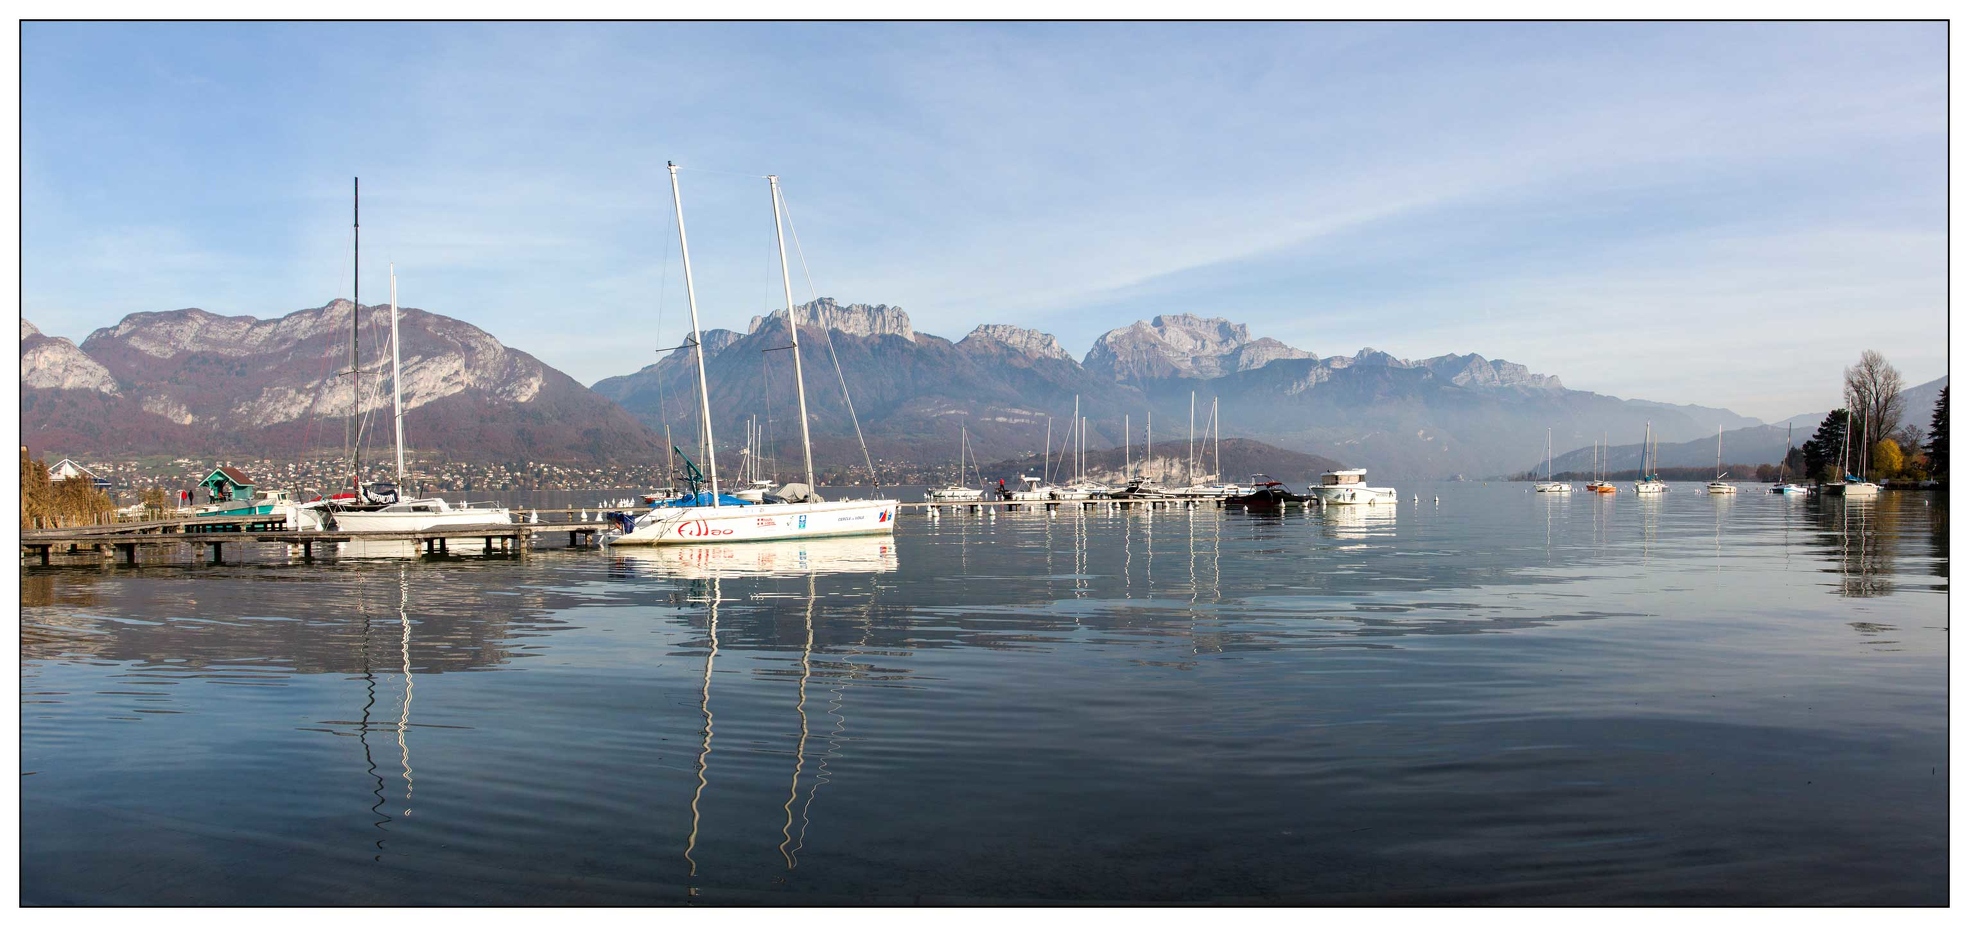 20151113-37_4681-Sevrier_Lac_Annecy_pano.jpg